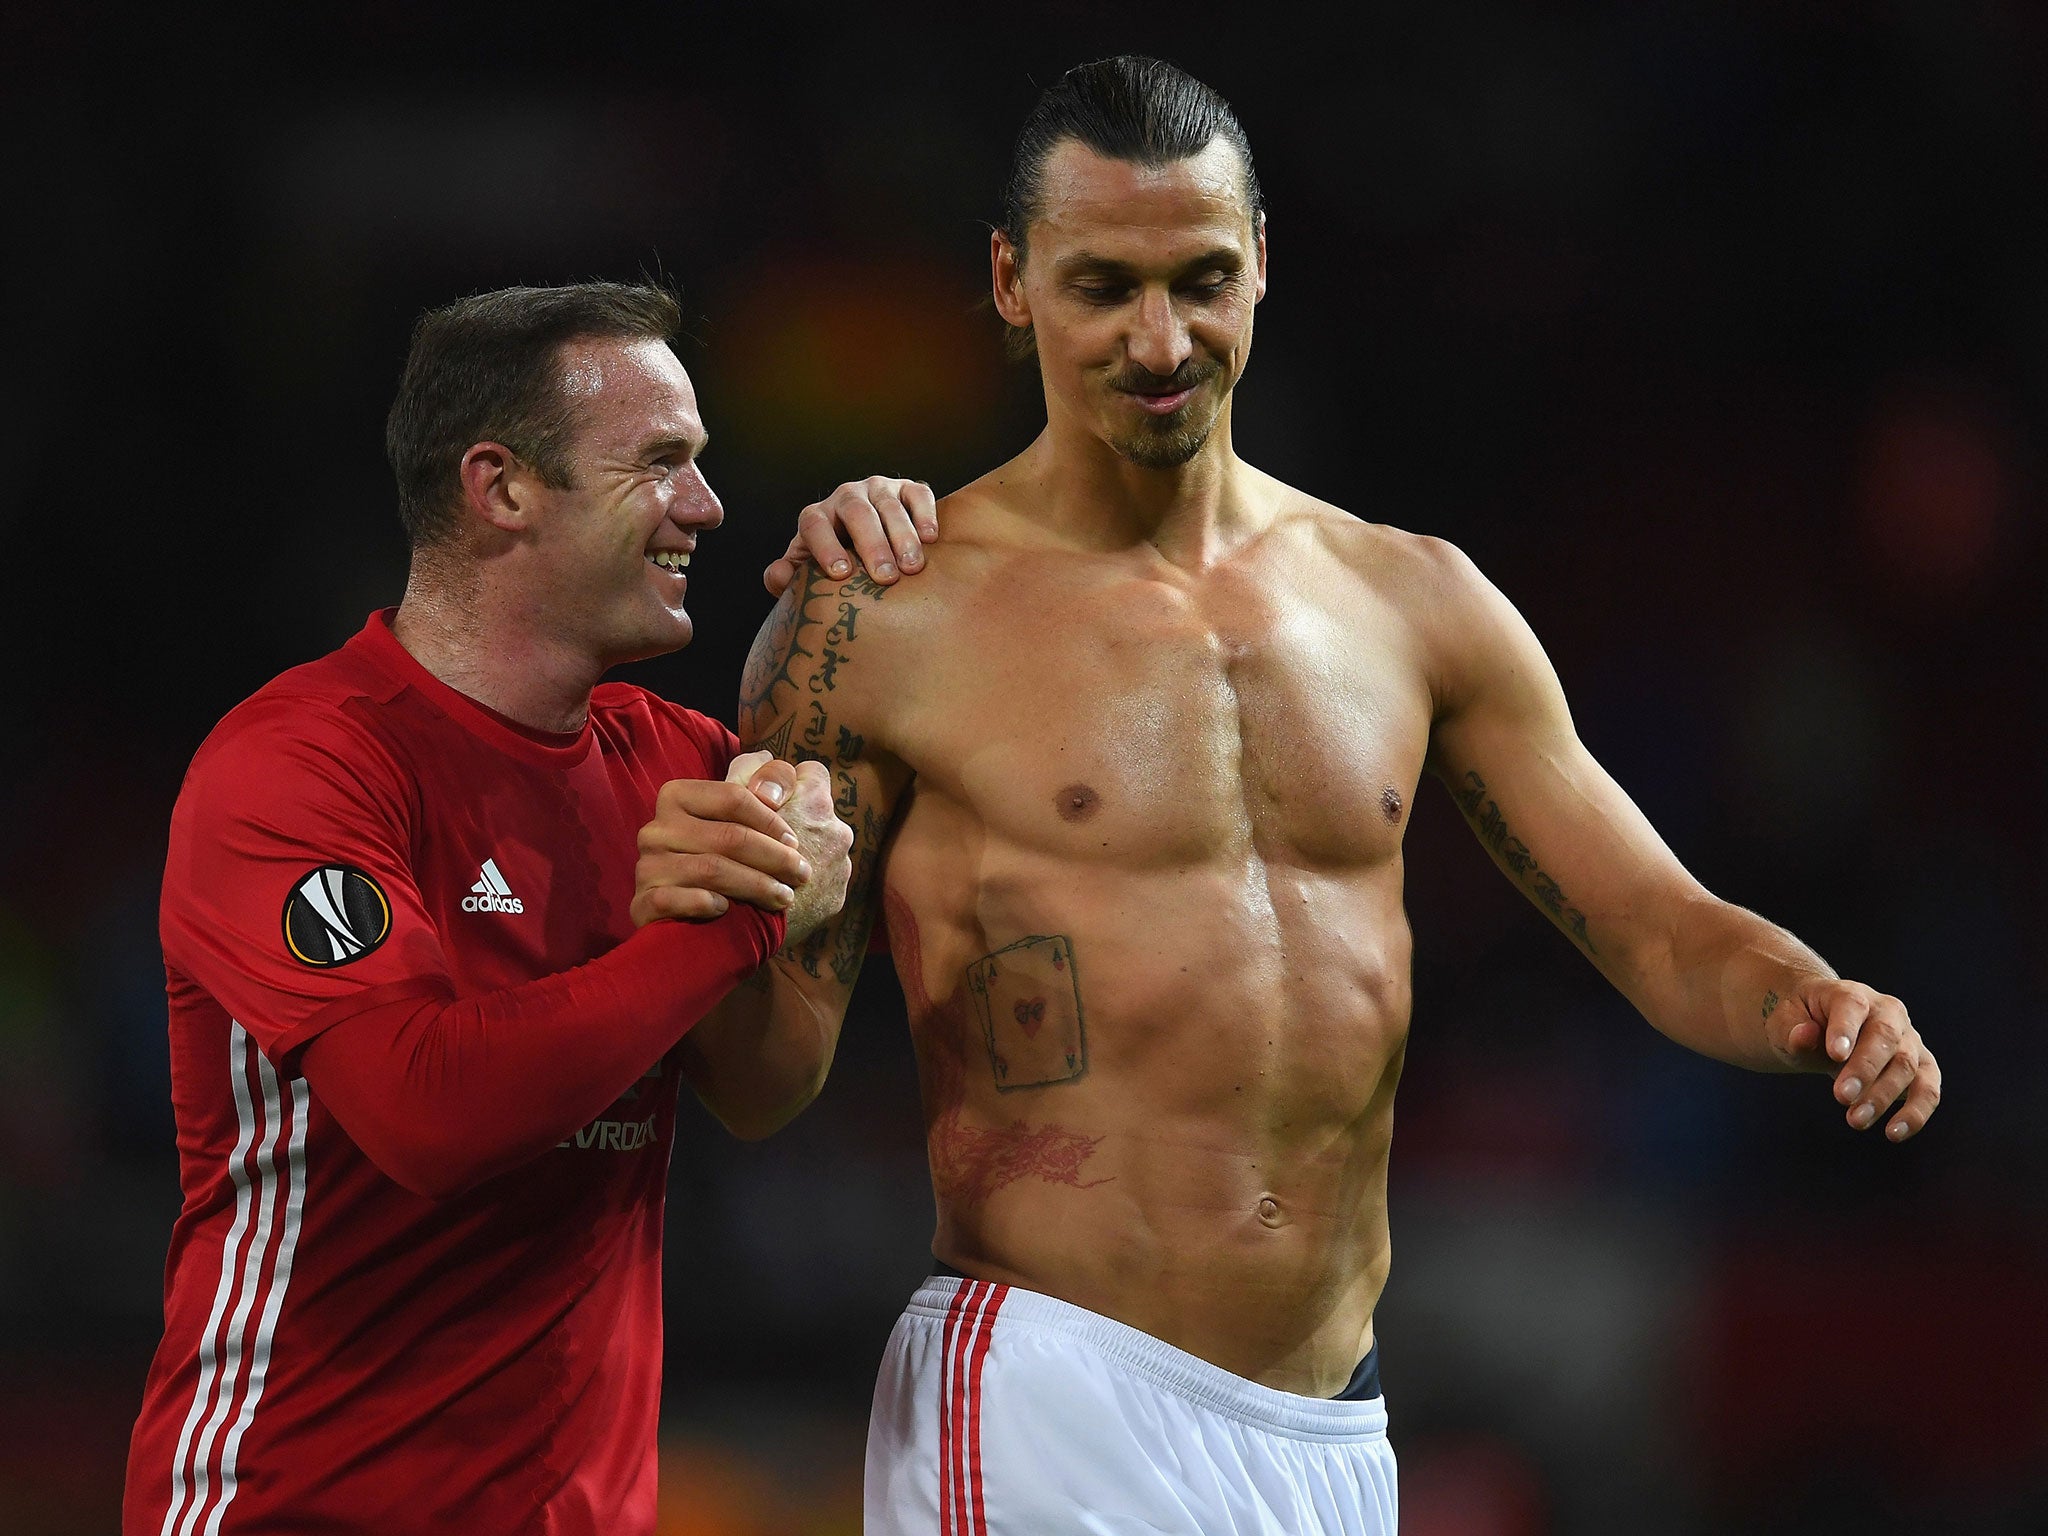 Zlatan Ibrahimovic and Wayne Rooney together following United's victory in the Europa League over FC Zorya Luhansk